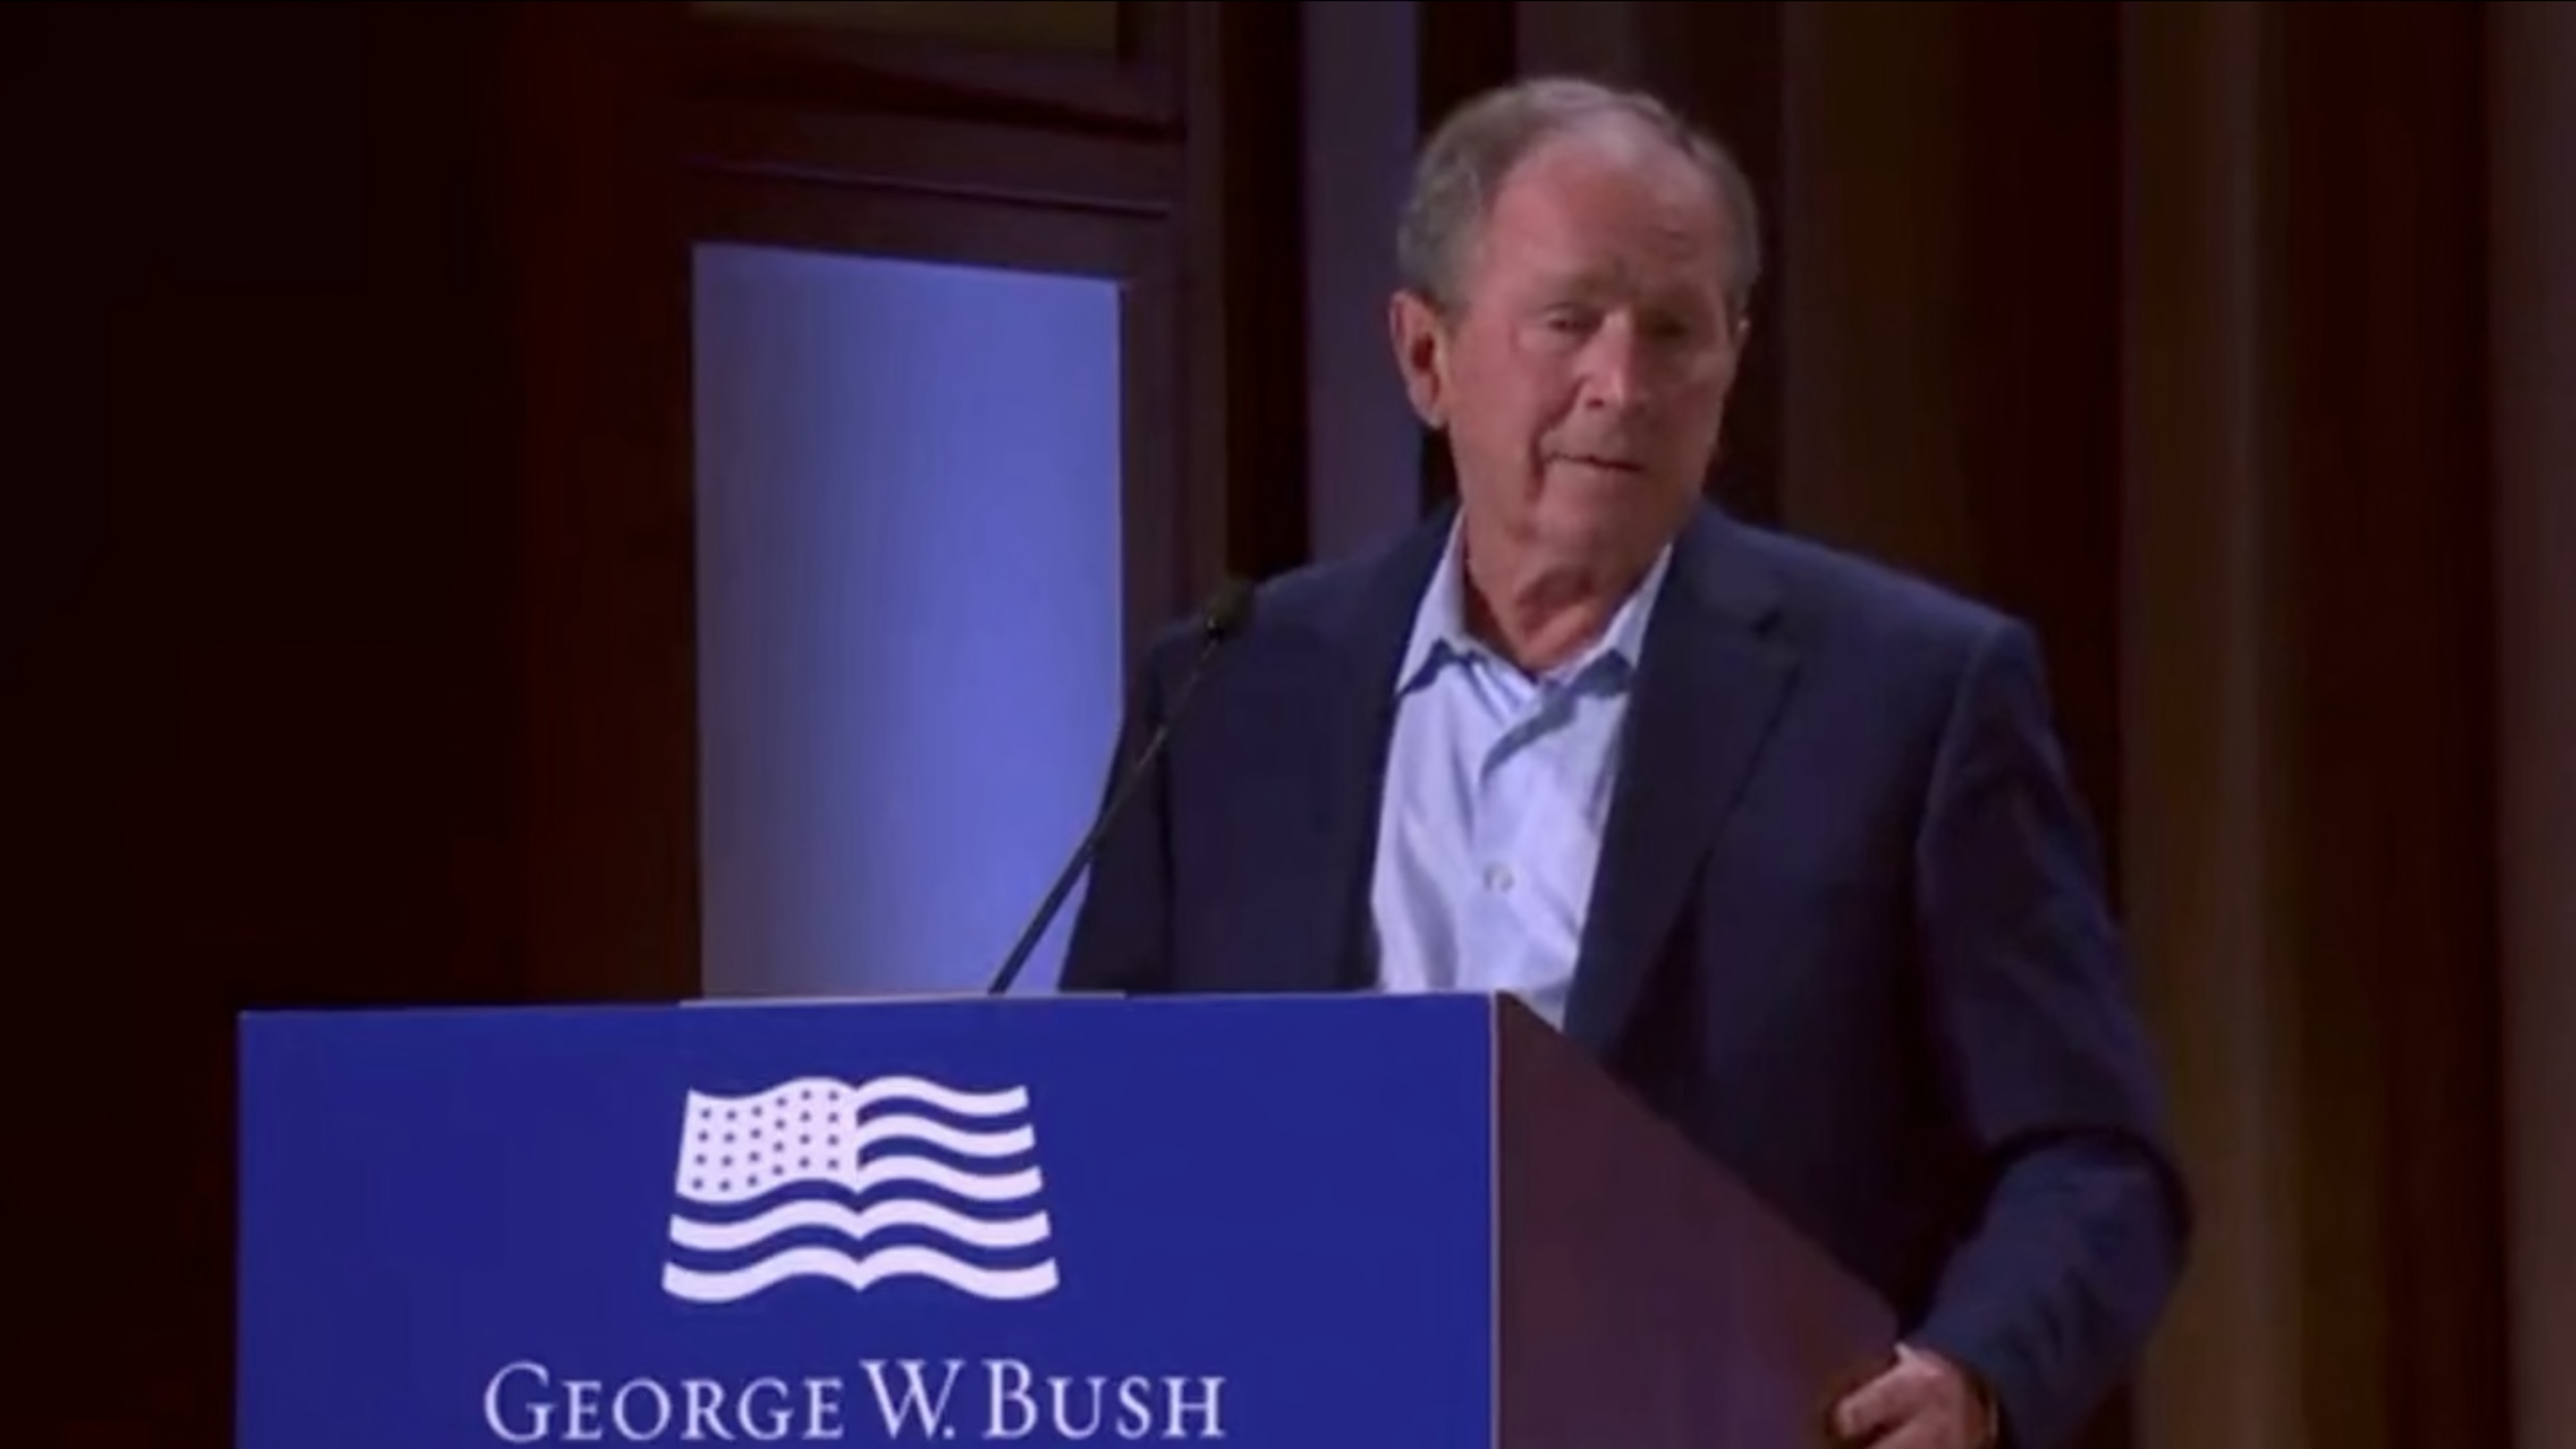 George W. Bush Accidentally Calls Invasion of Iraq 'Unjustified and
Brutal' While Discussing War in Ukraine